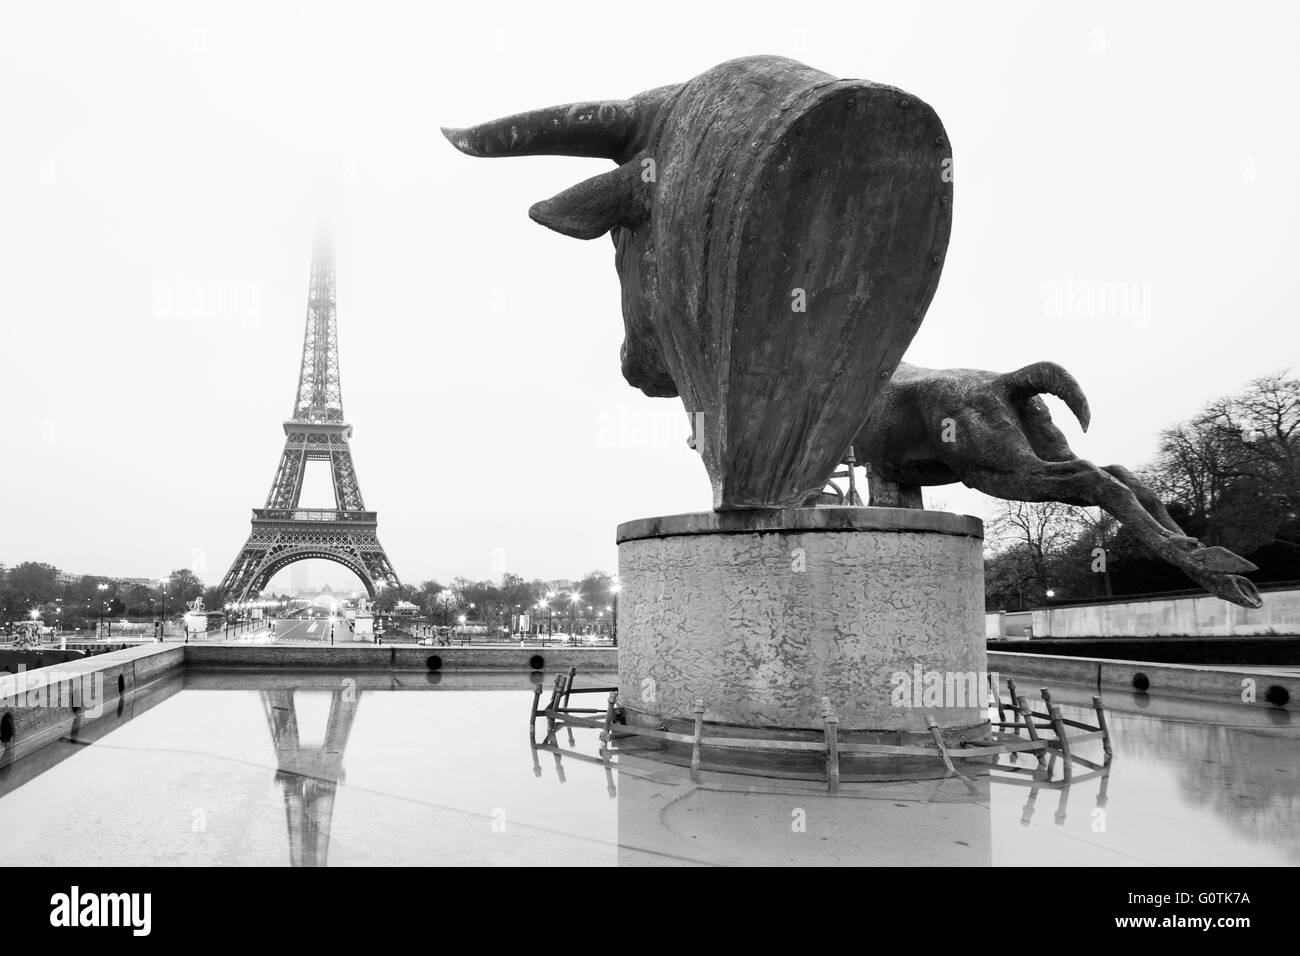 Sculptures on Trocadero and Eiffel Tower in Paris Stock Photo - Alamy